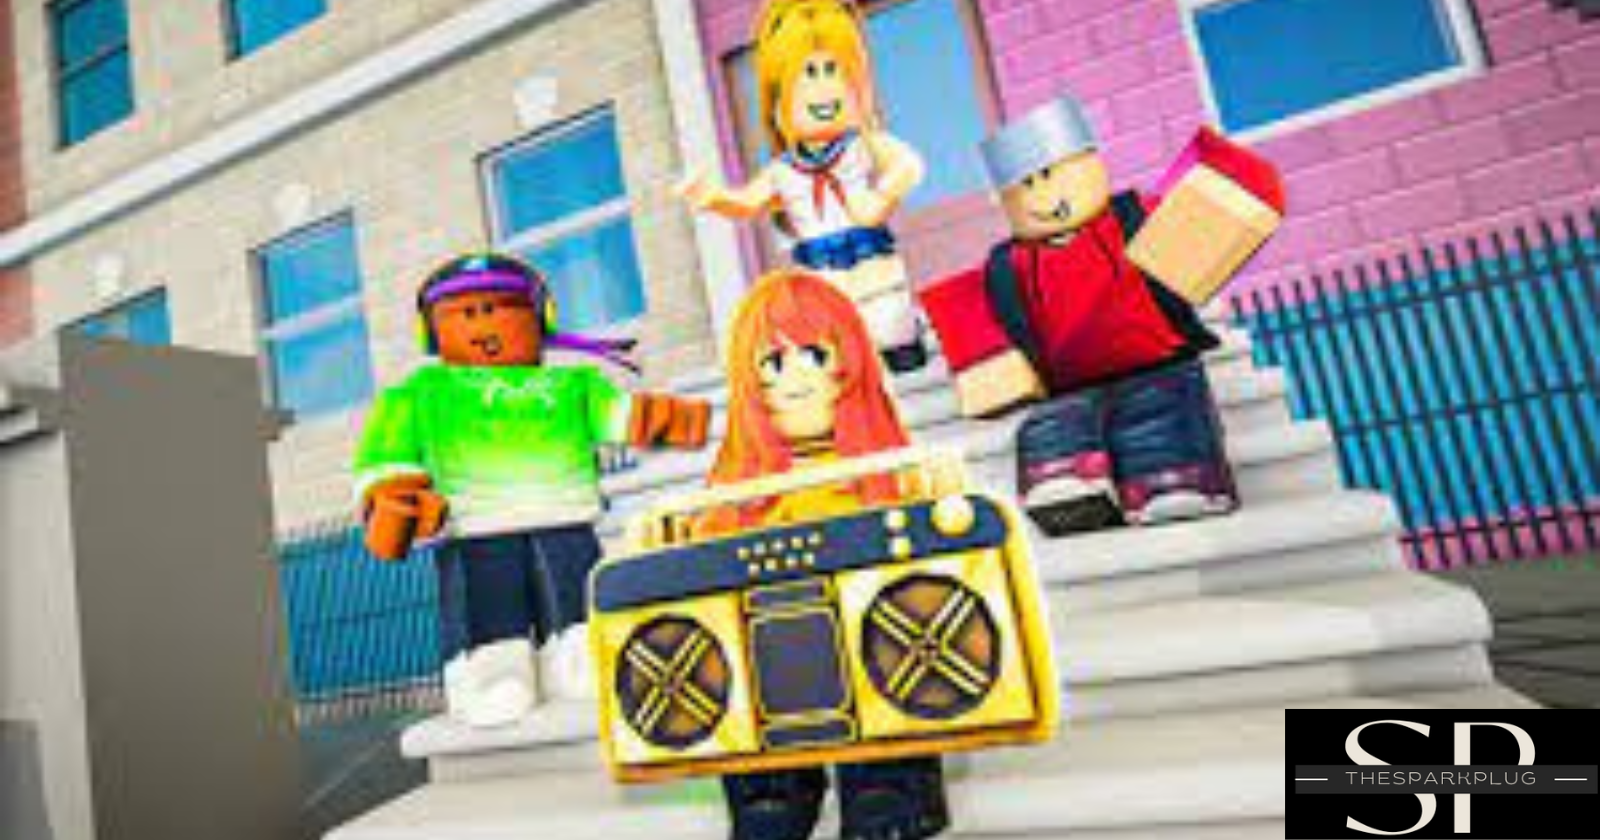 Warner Music Group Launches Social Music Metaverse Rhythm City on Roblox